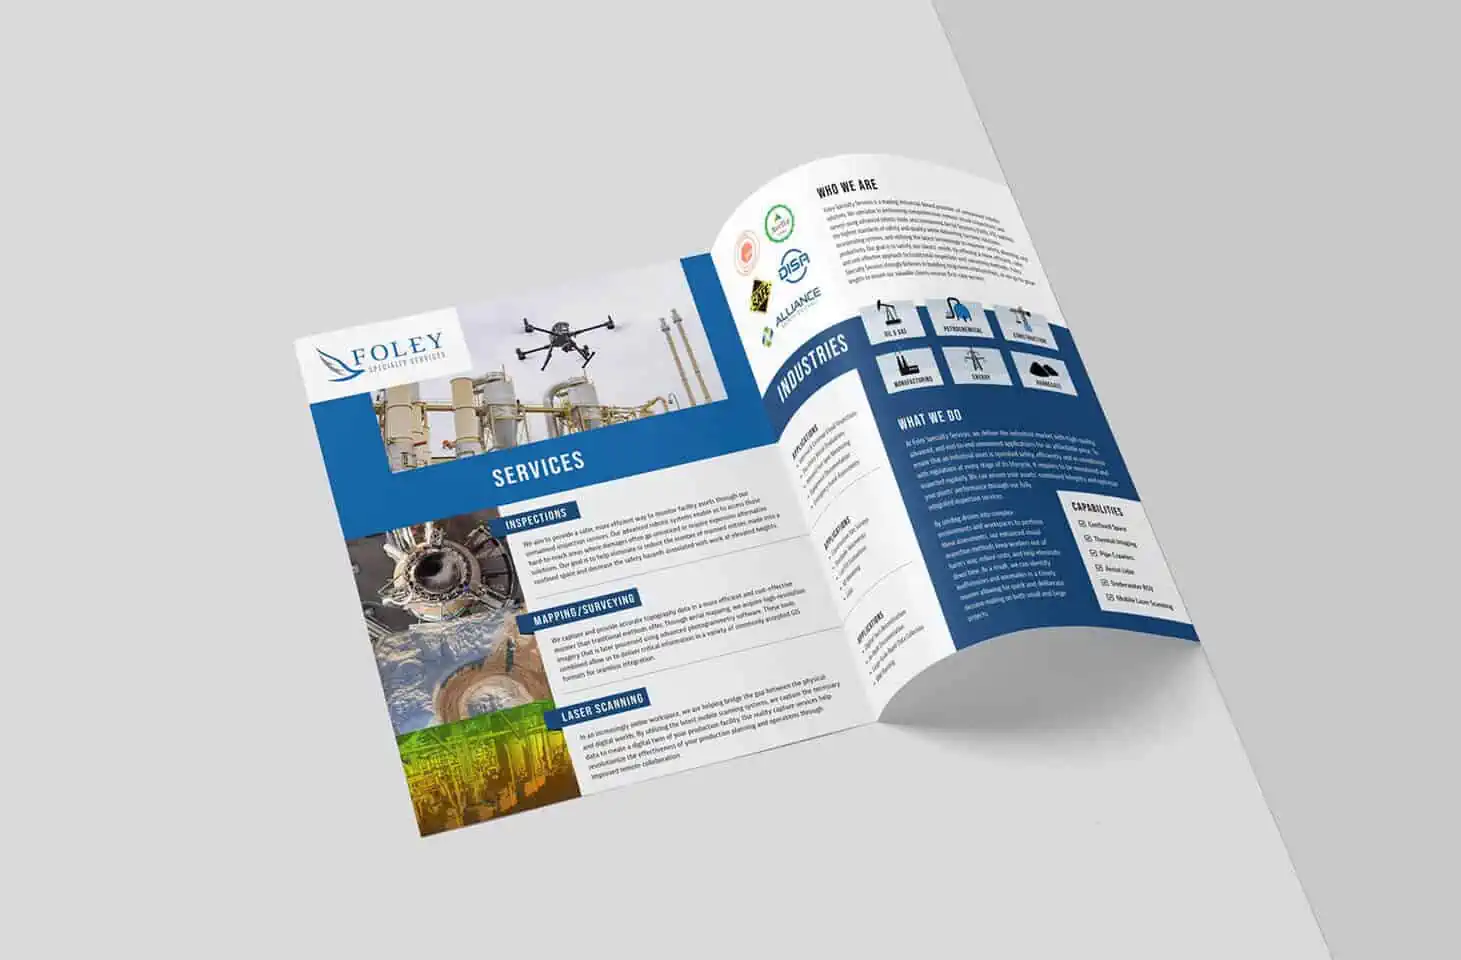 print marketing materials printed for industrial company